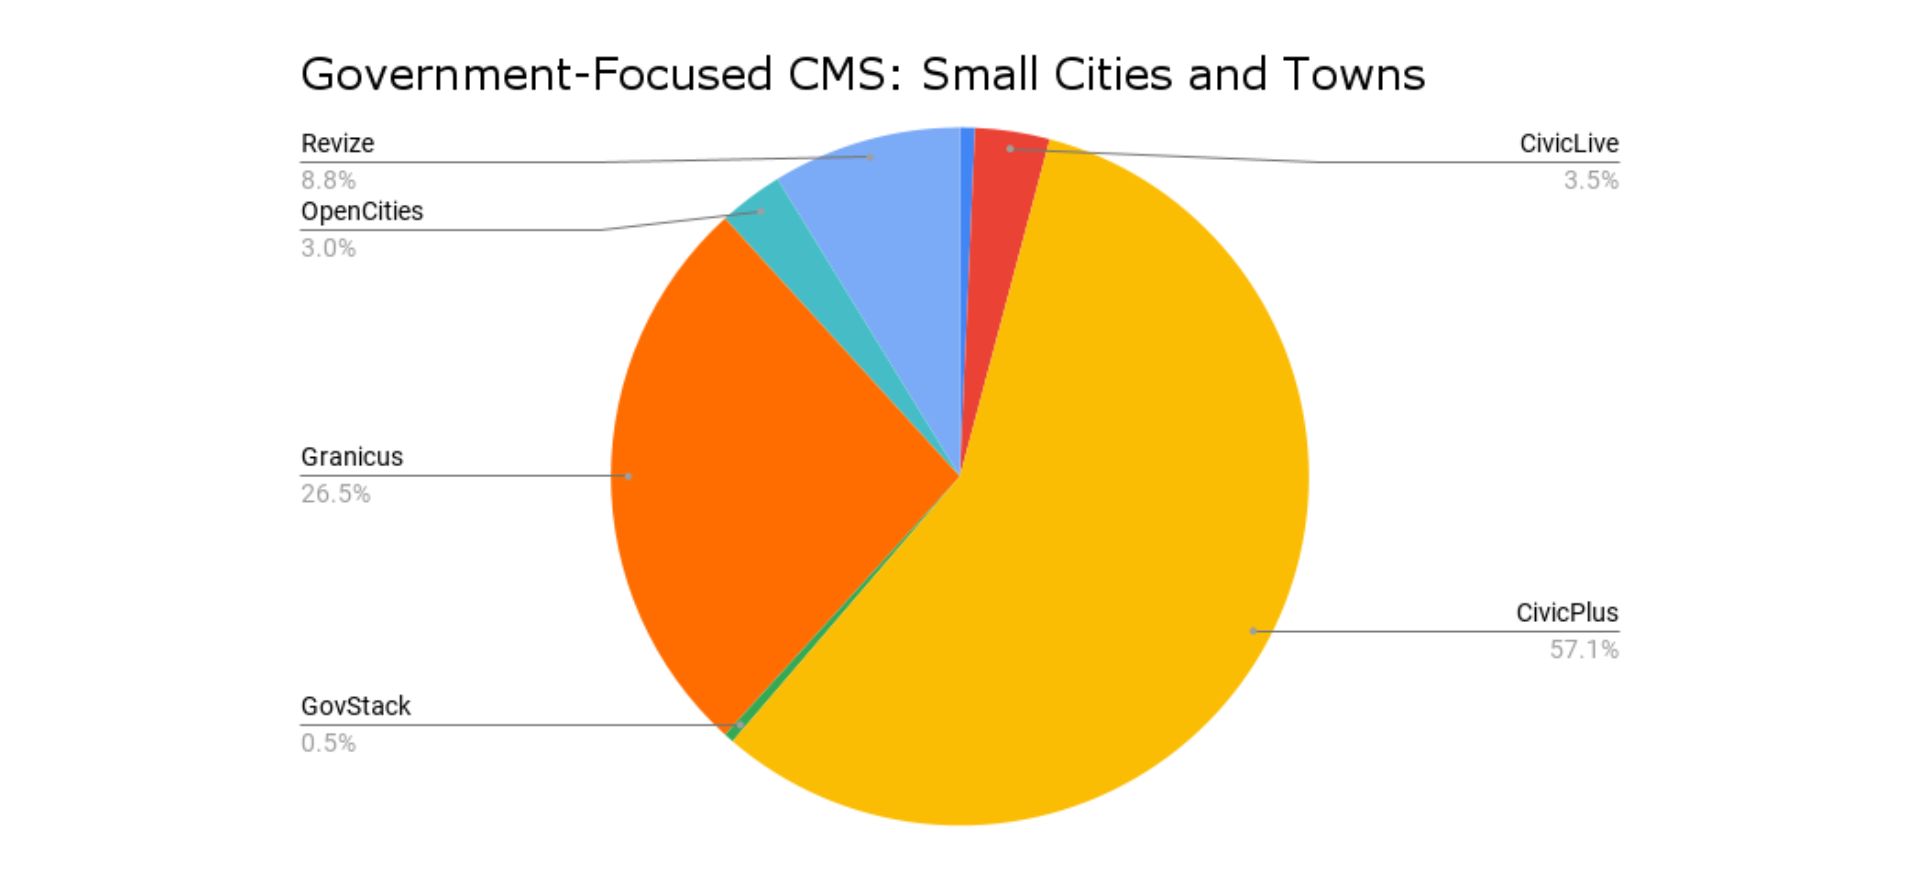 government-focused cms: small cities